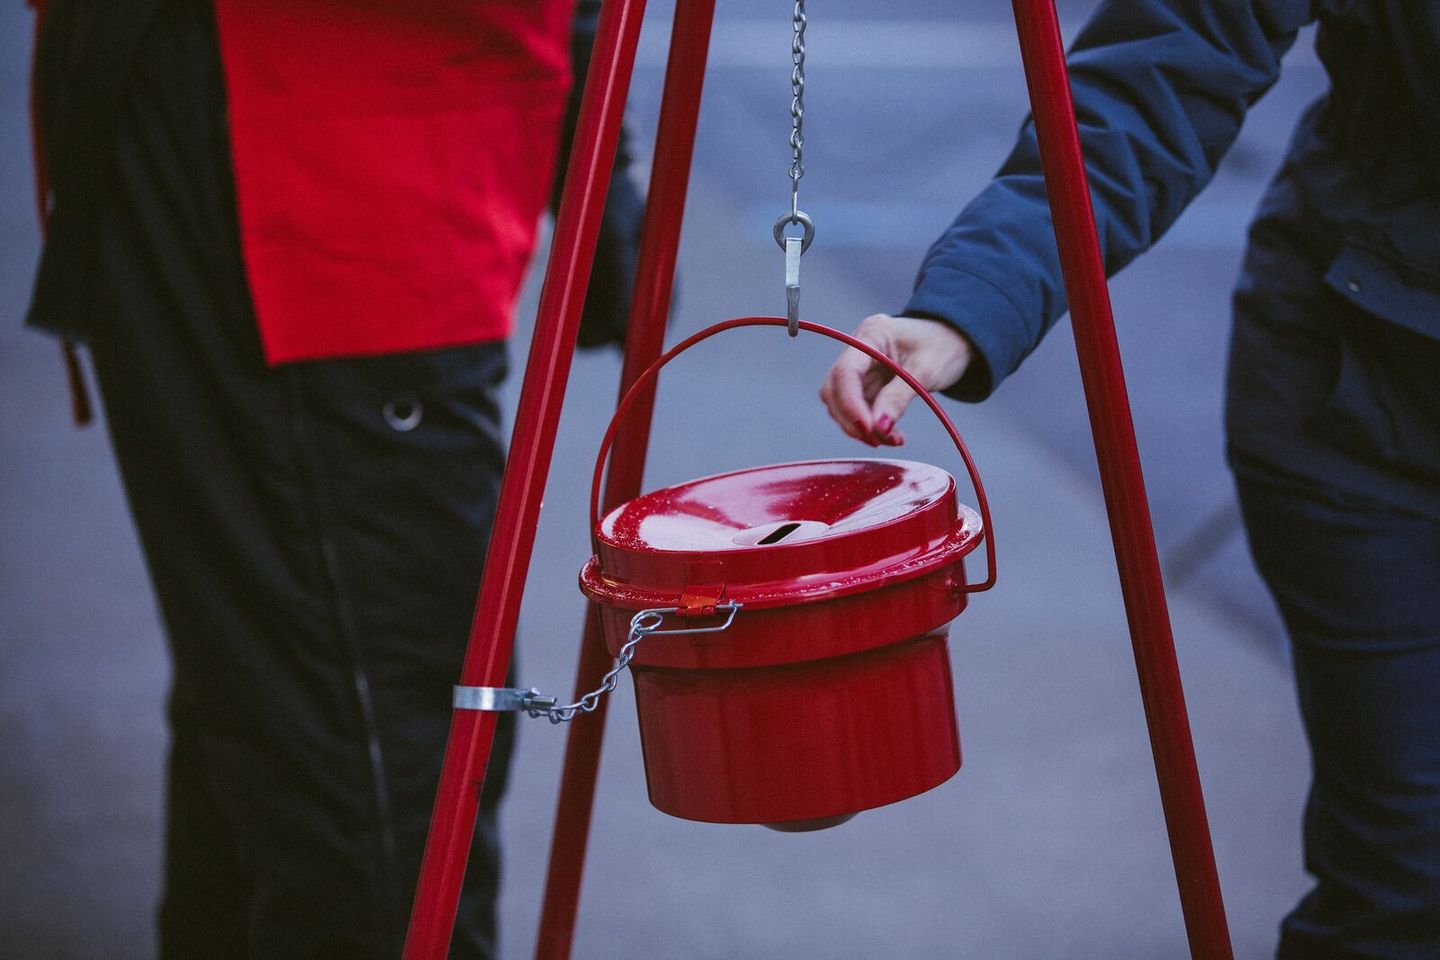 Salvation Army kettles down 8% as high-demand holiday draws near, official says